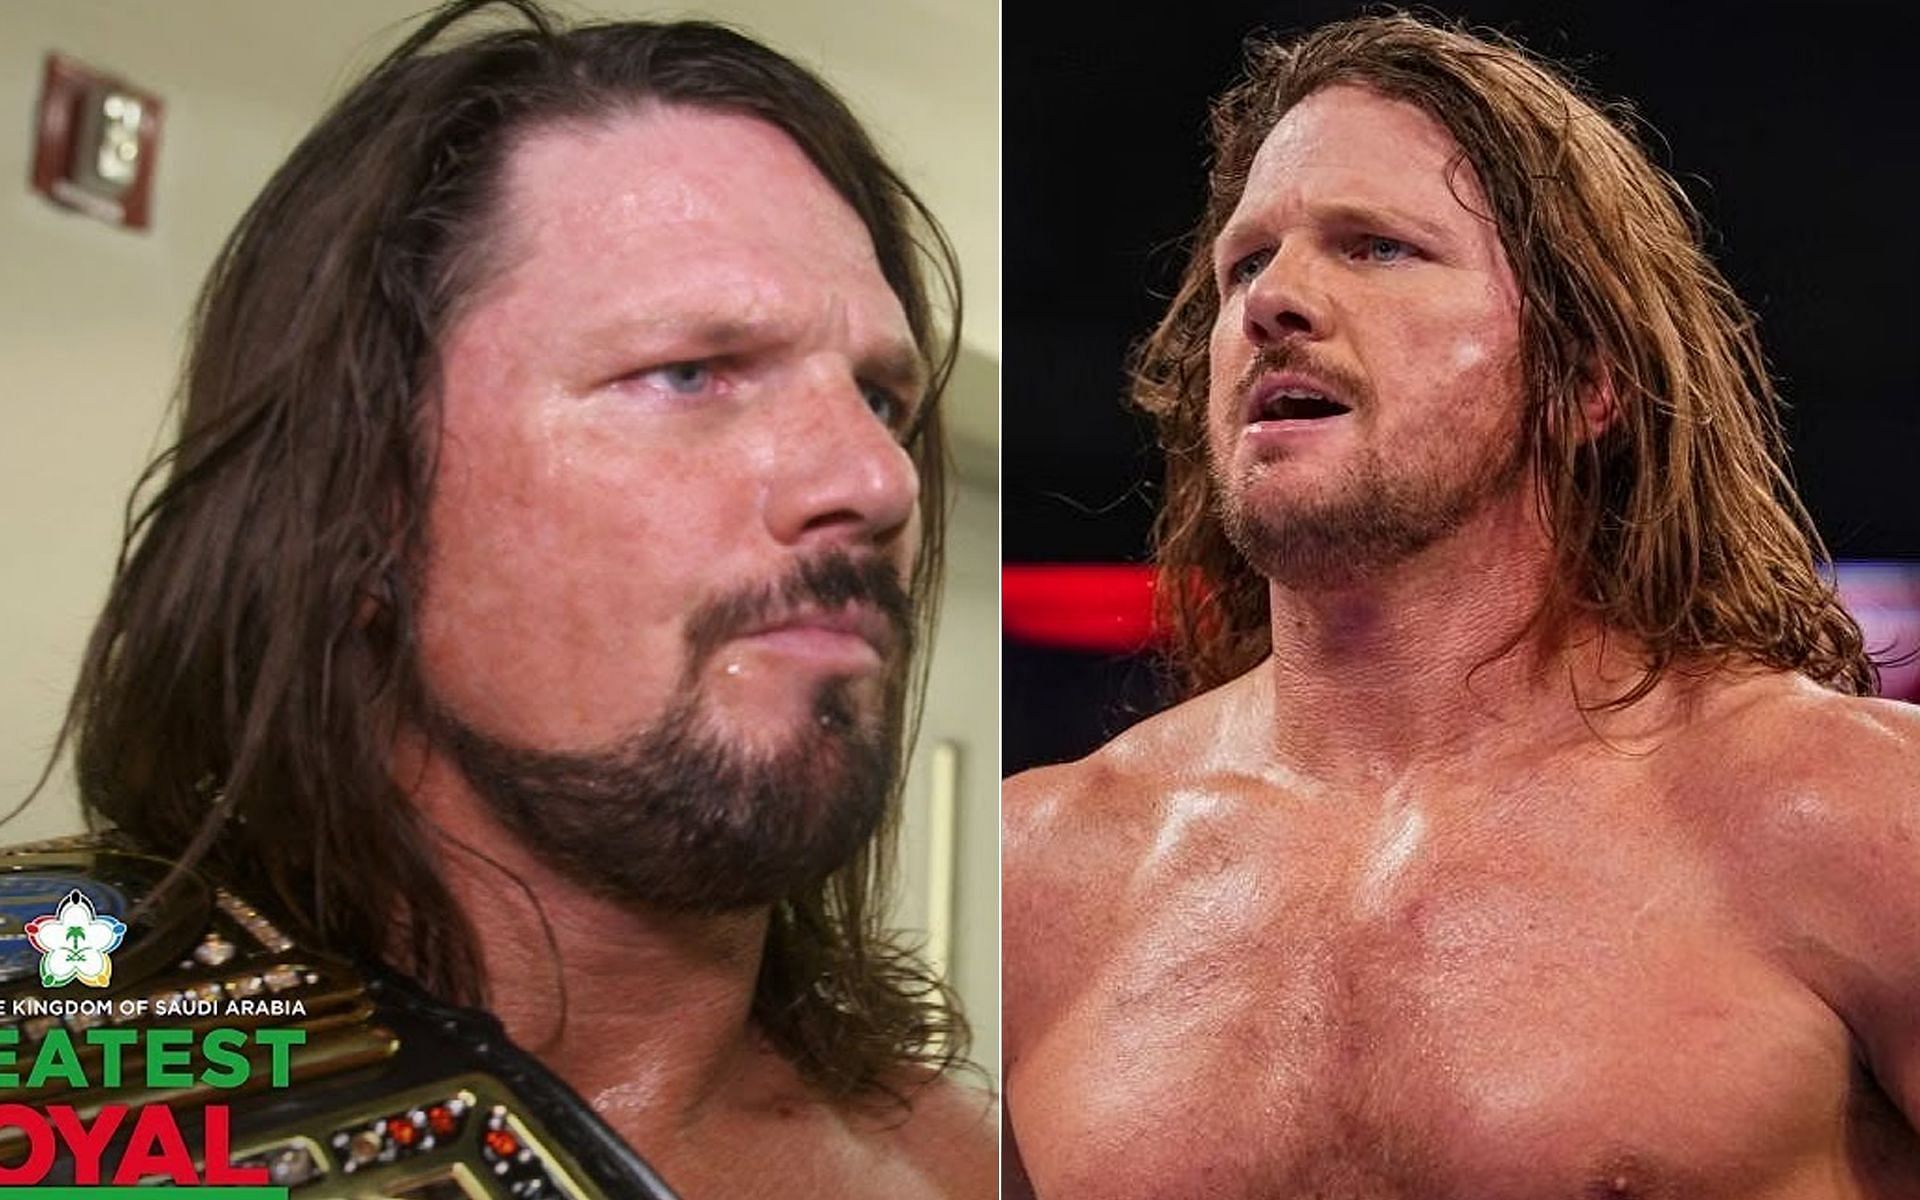 AJ Styles is currently feuding with the Bloodline on SmackDown